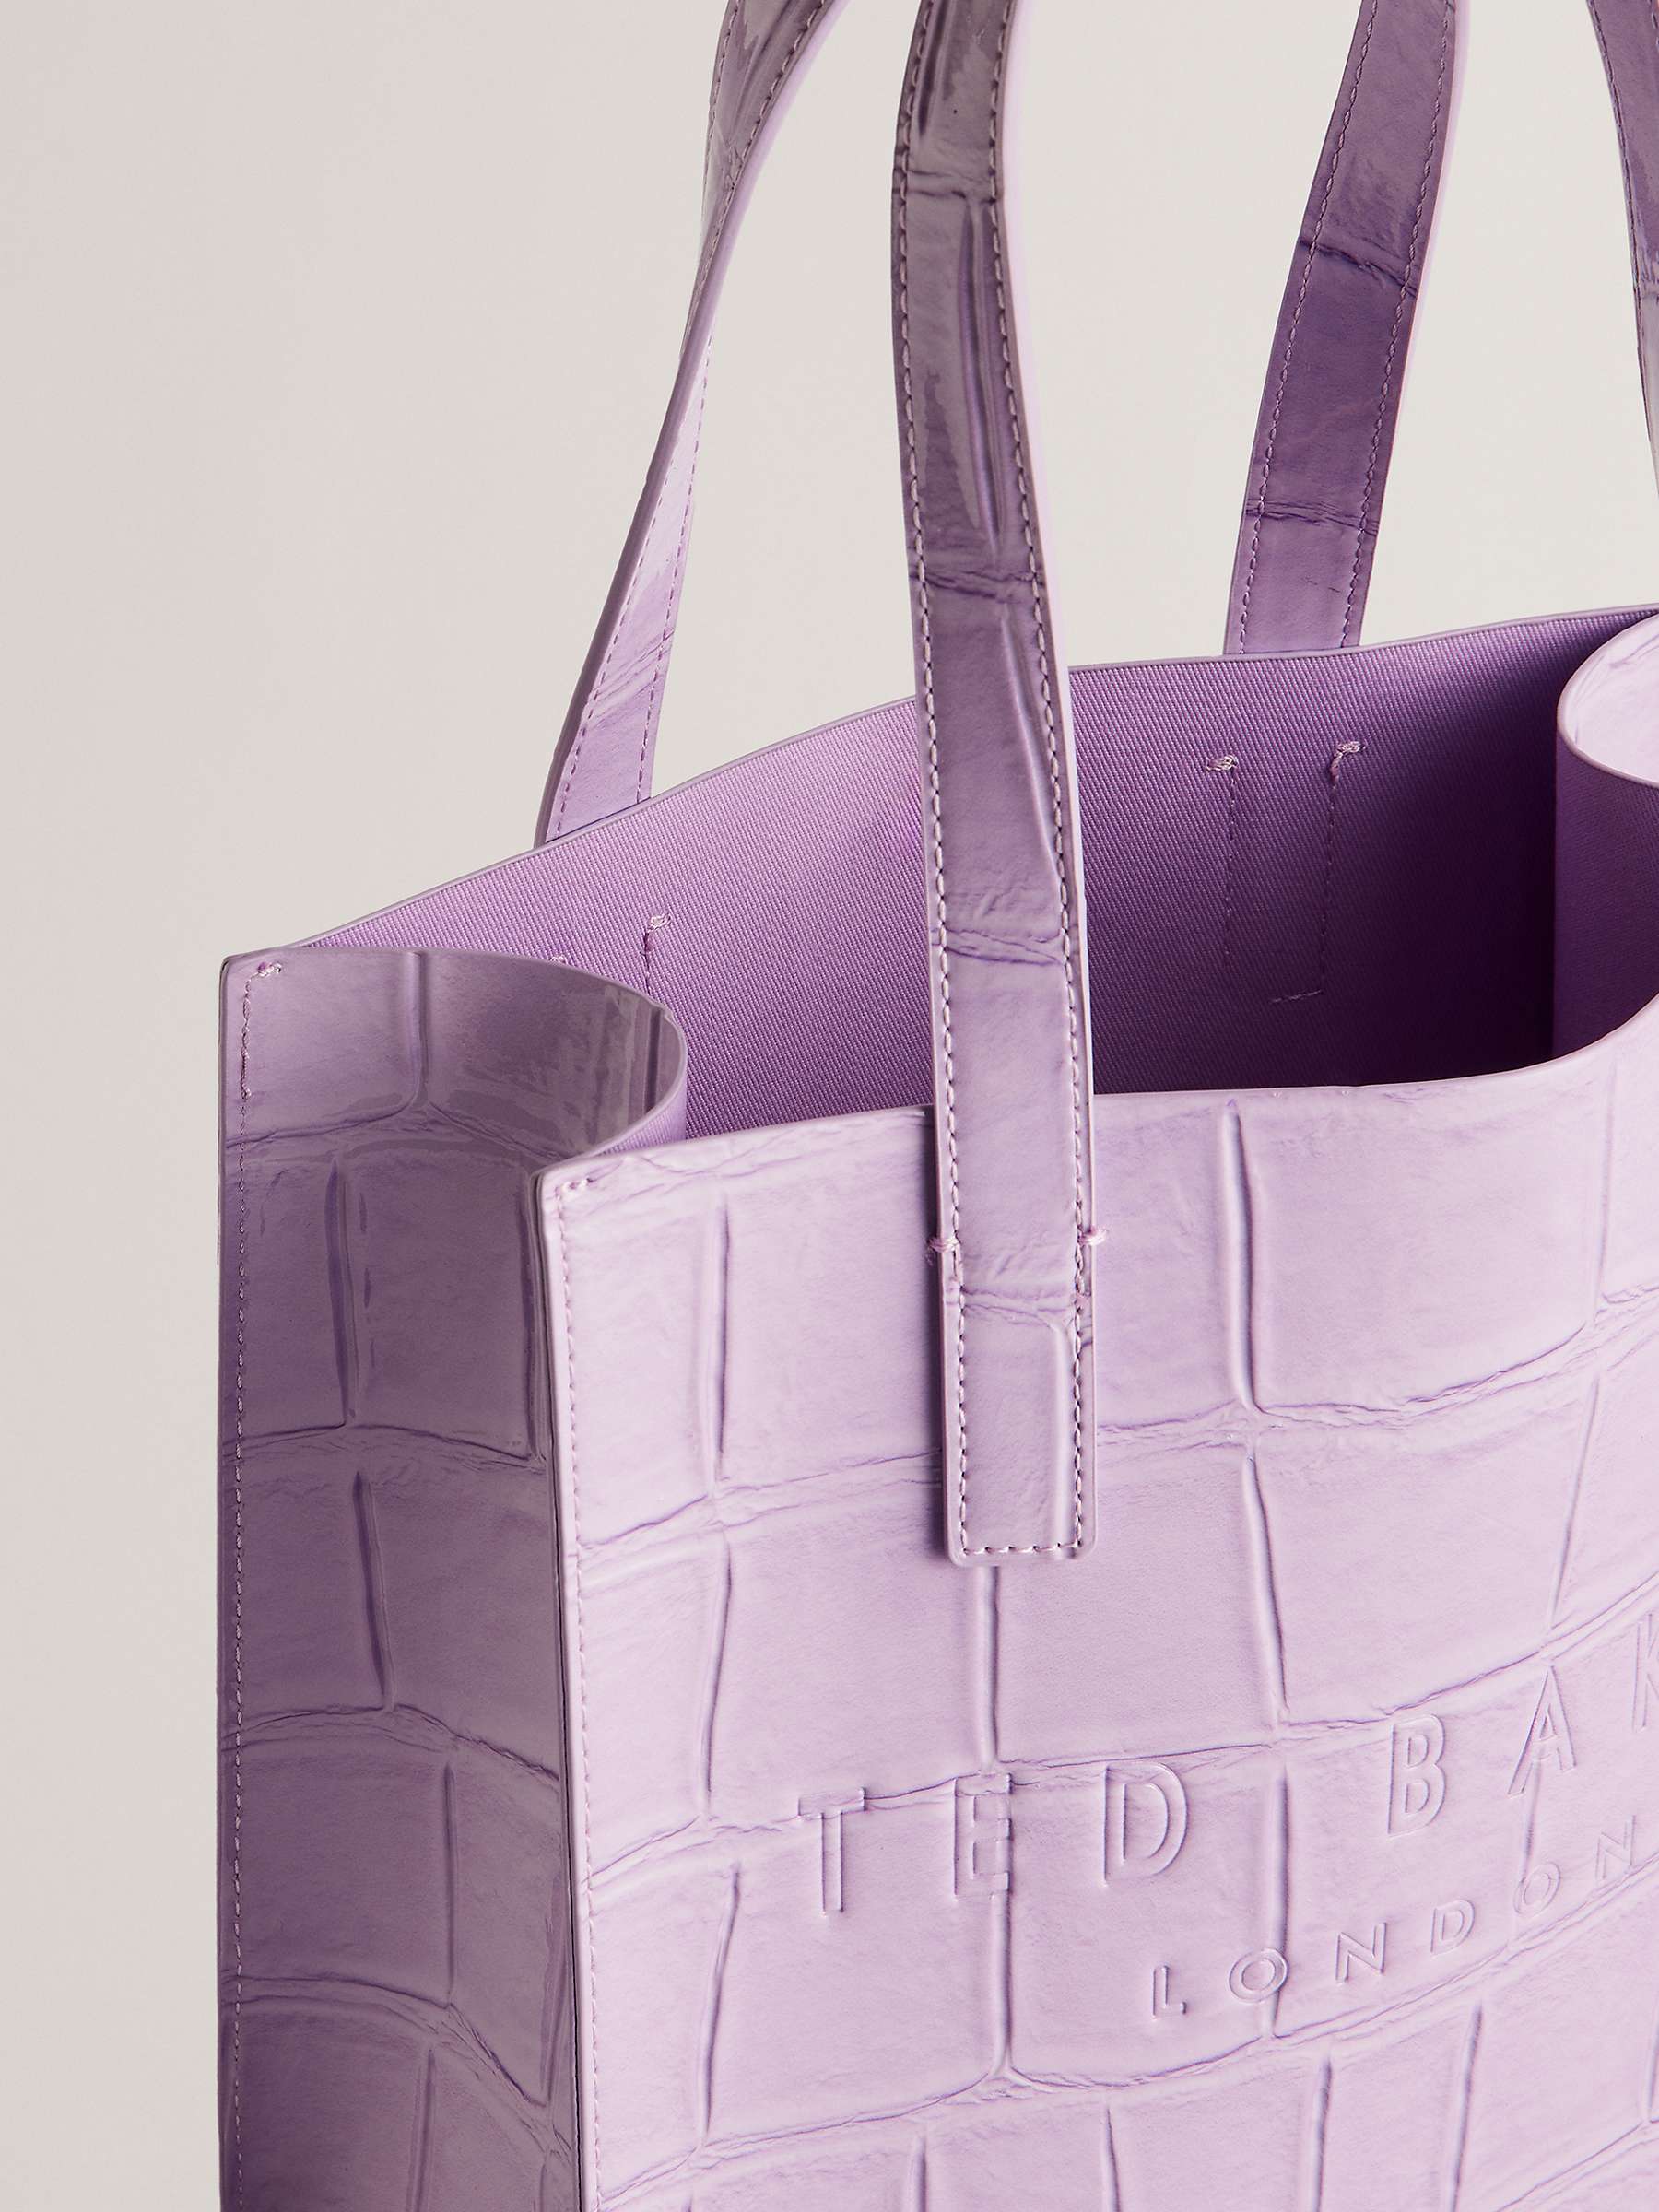 Buy Ted Baker Reptcon Croc Detail Small Icon Shopper Bag Online at johnlewis.com